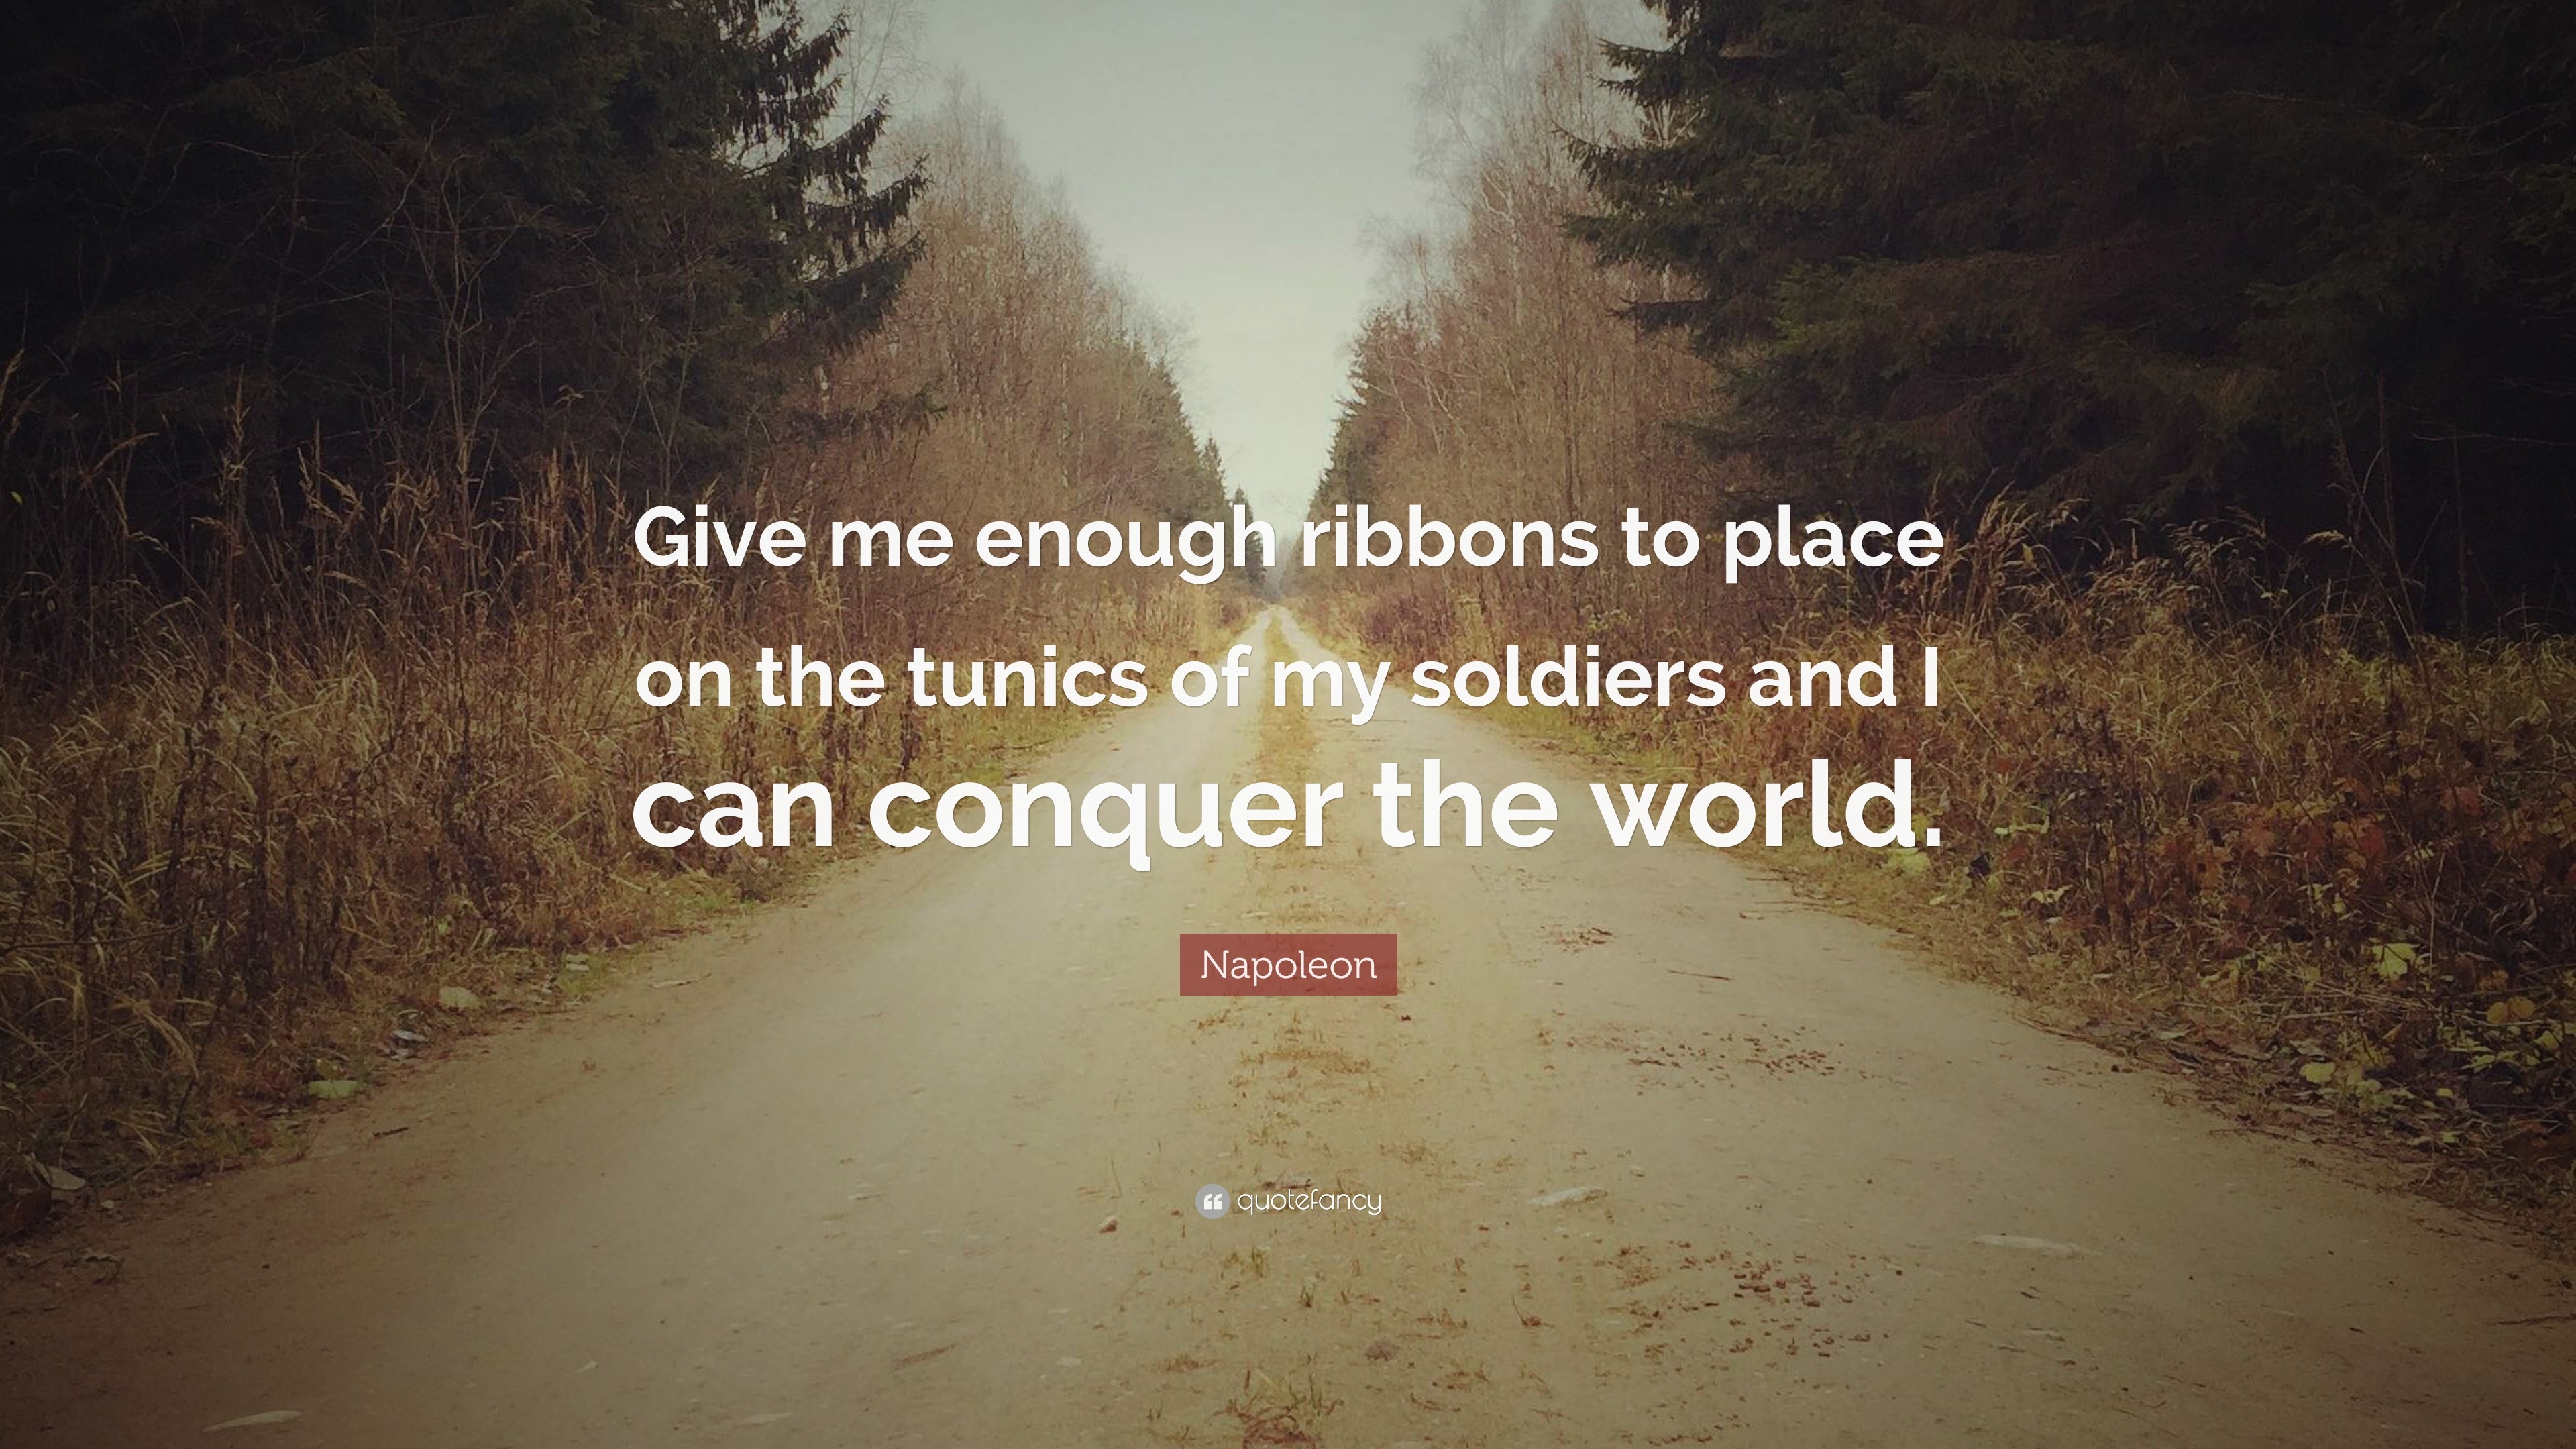 Napoleon Quote: “Give me enough ribbons to place on the tunics of my